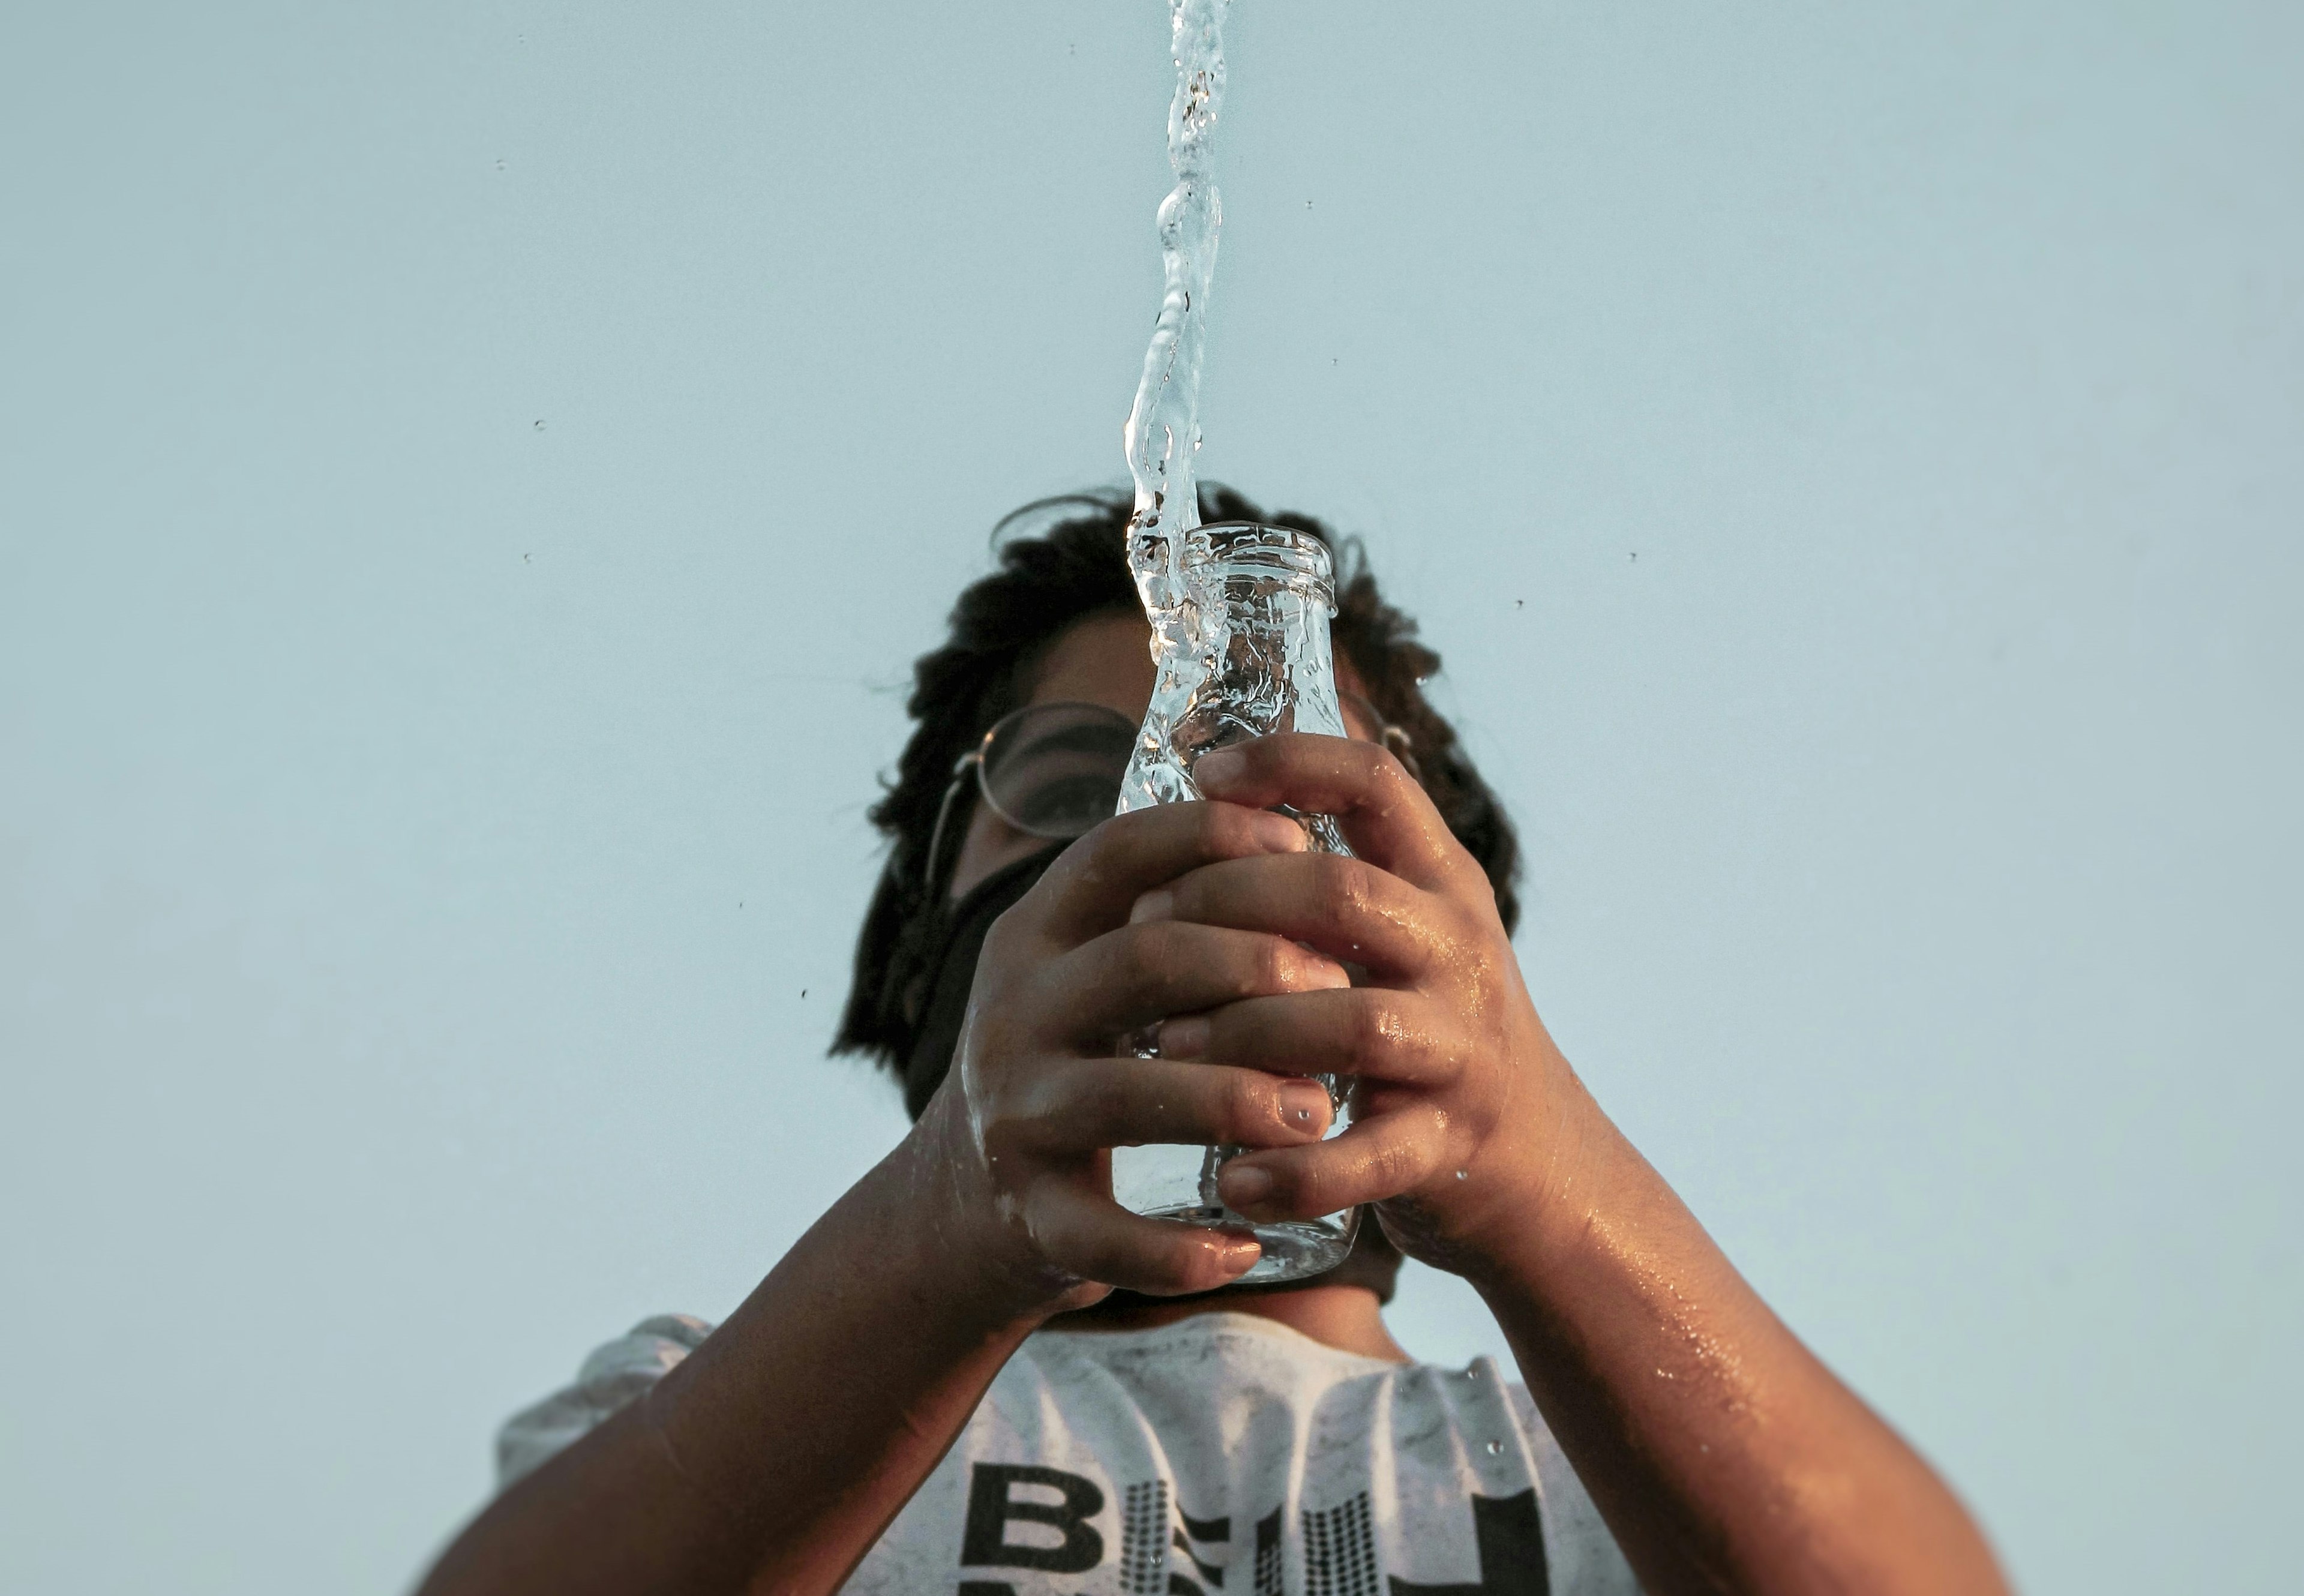 a man spilling water out of a glass jar, photographed from below